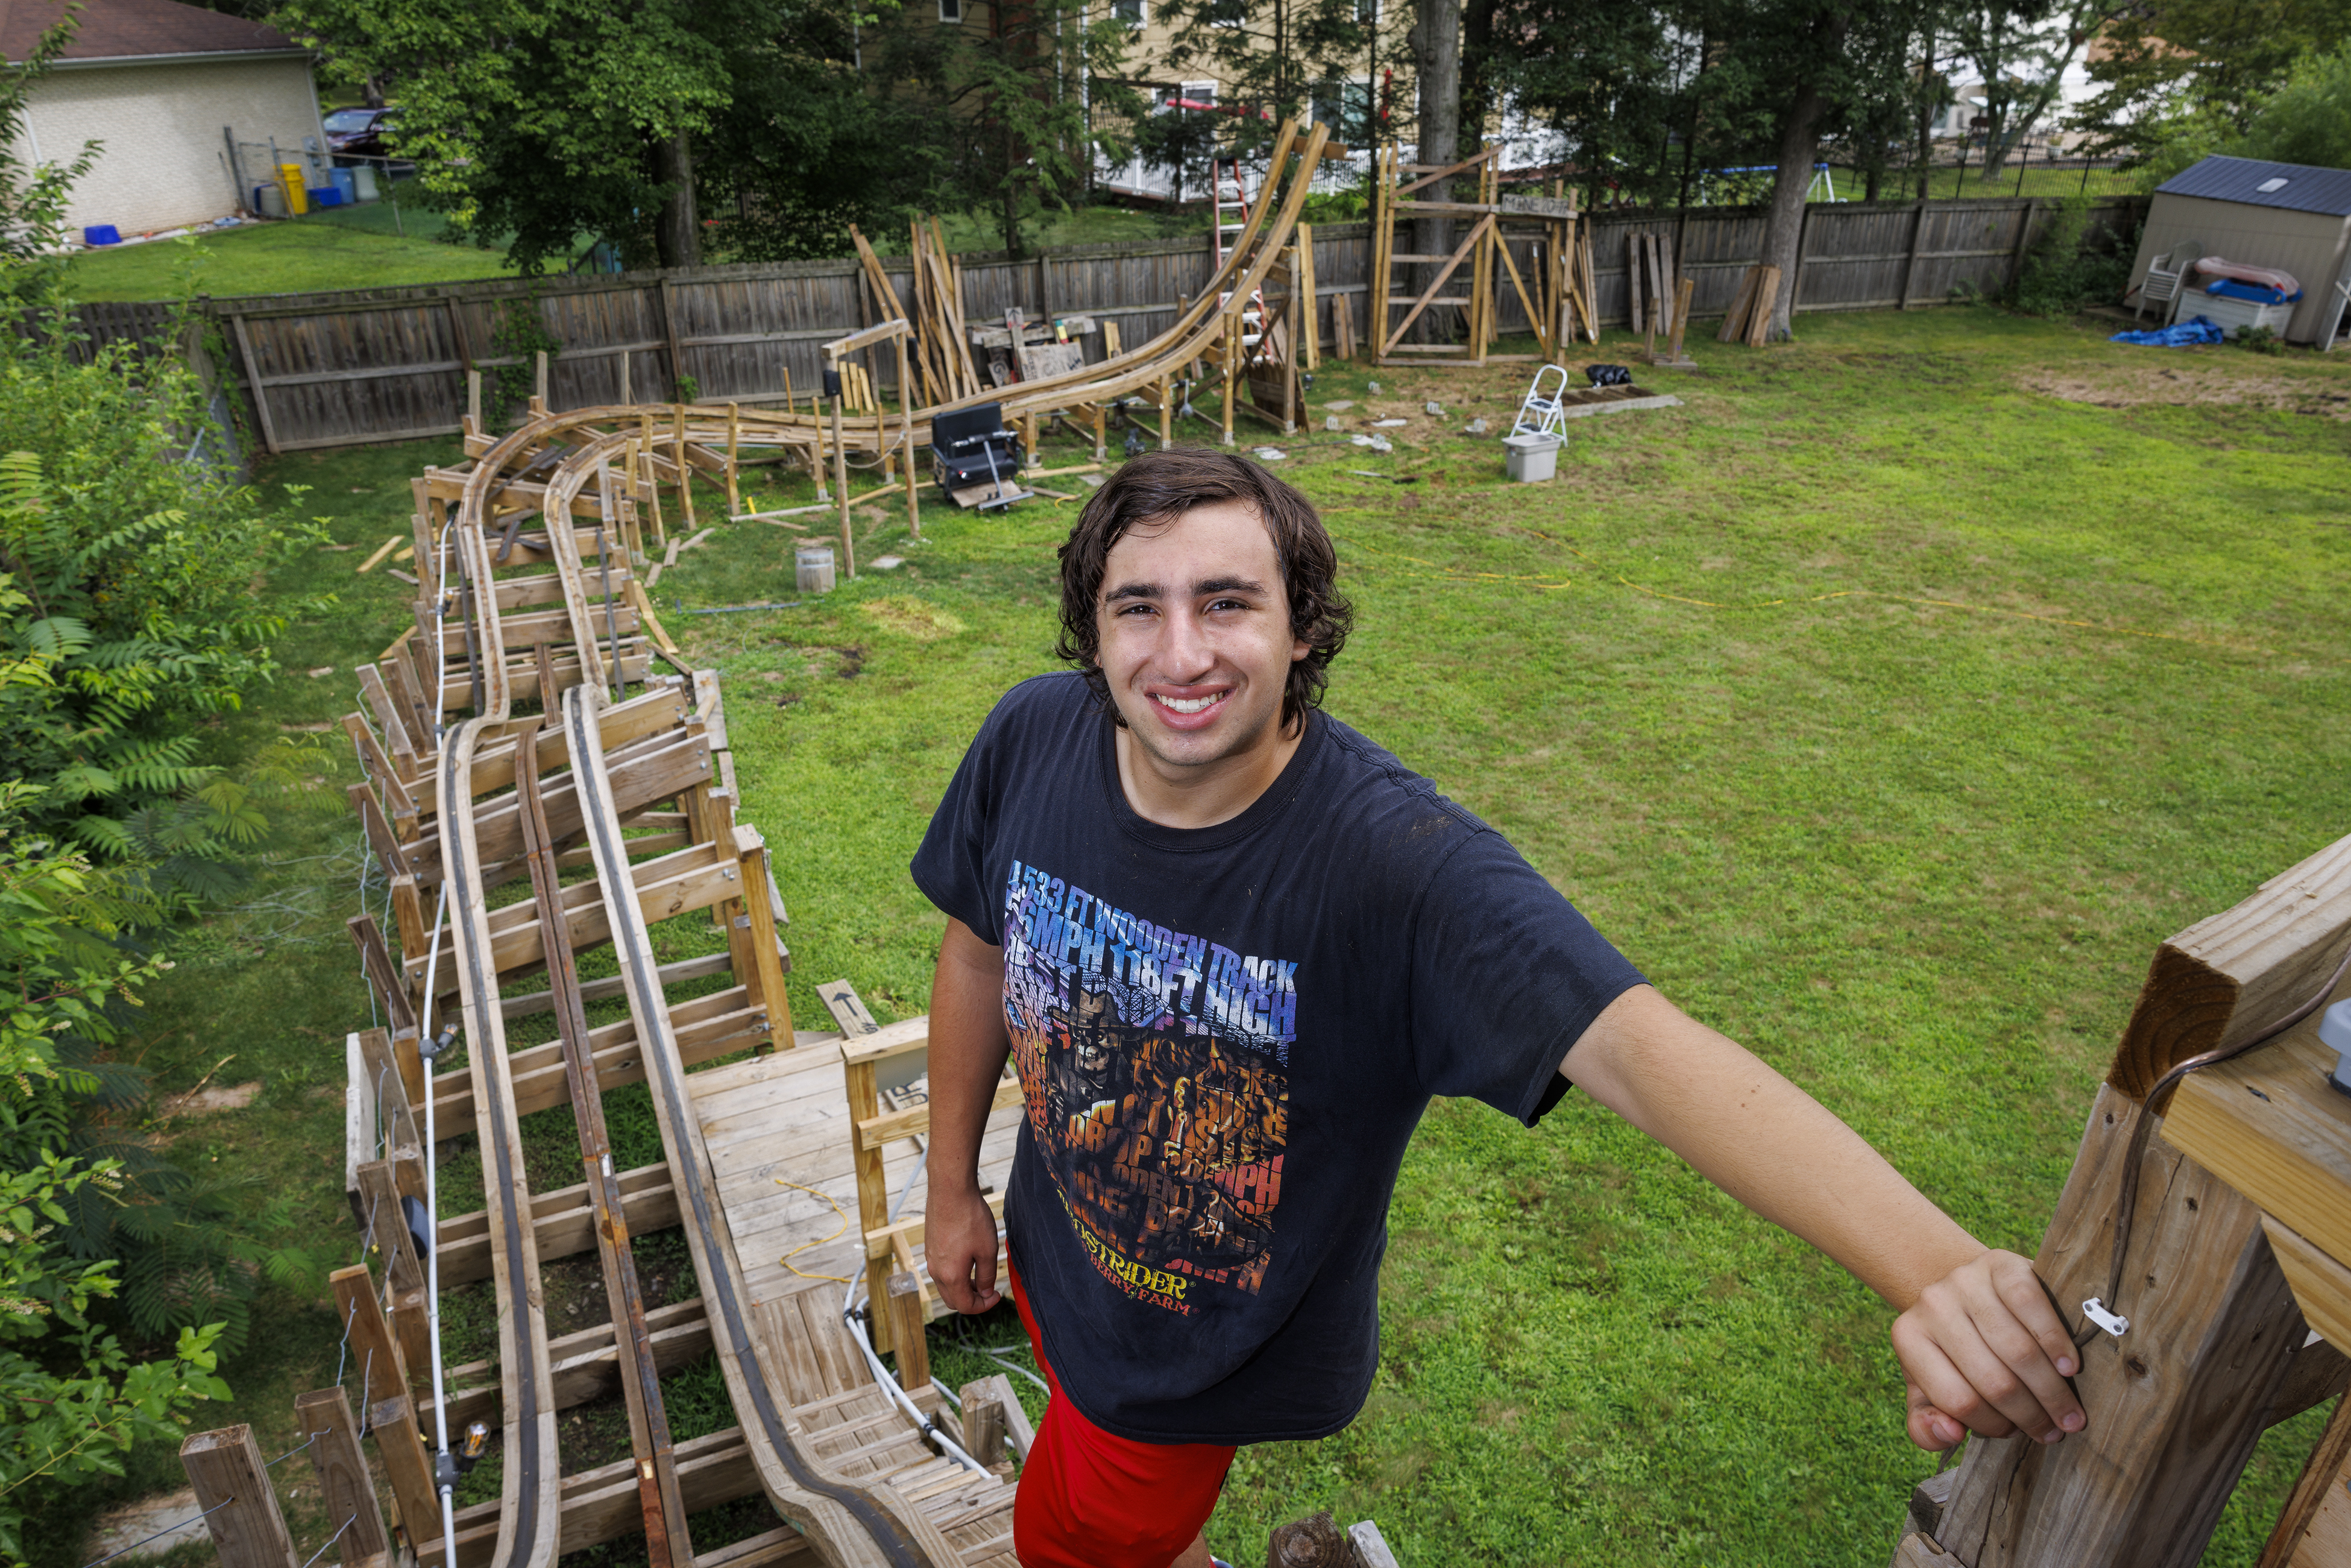 Backyard roller coaster in New Jersey was fun while it lasted photo